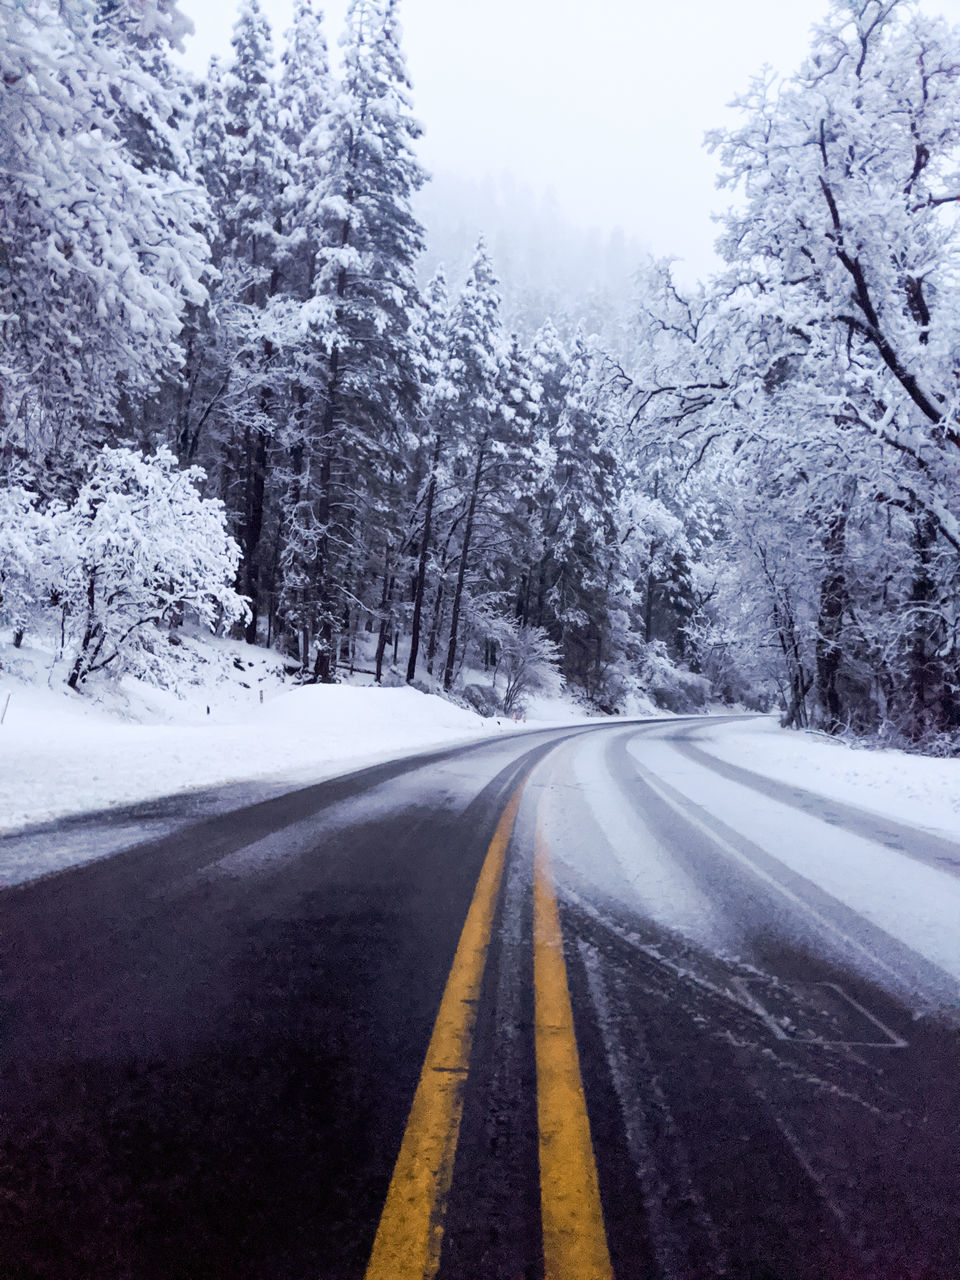 ROAD AMIDST TREES AND SNOW COVERED LANDSCAPE